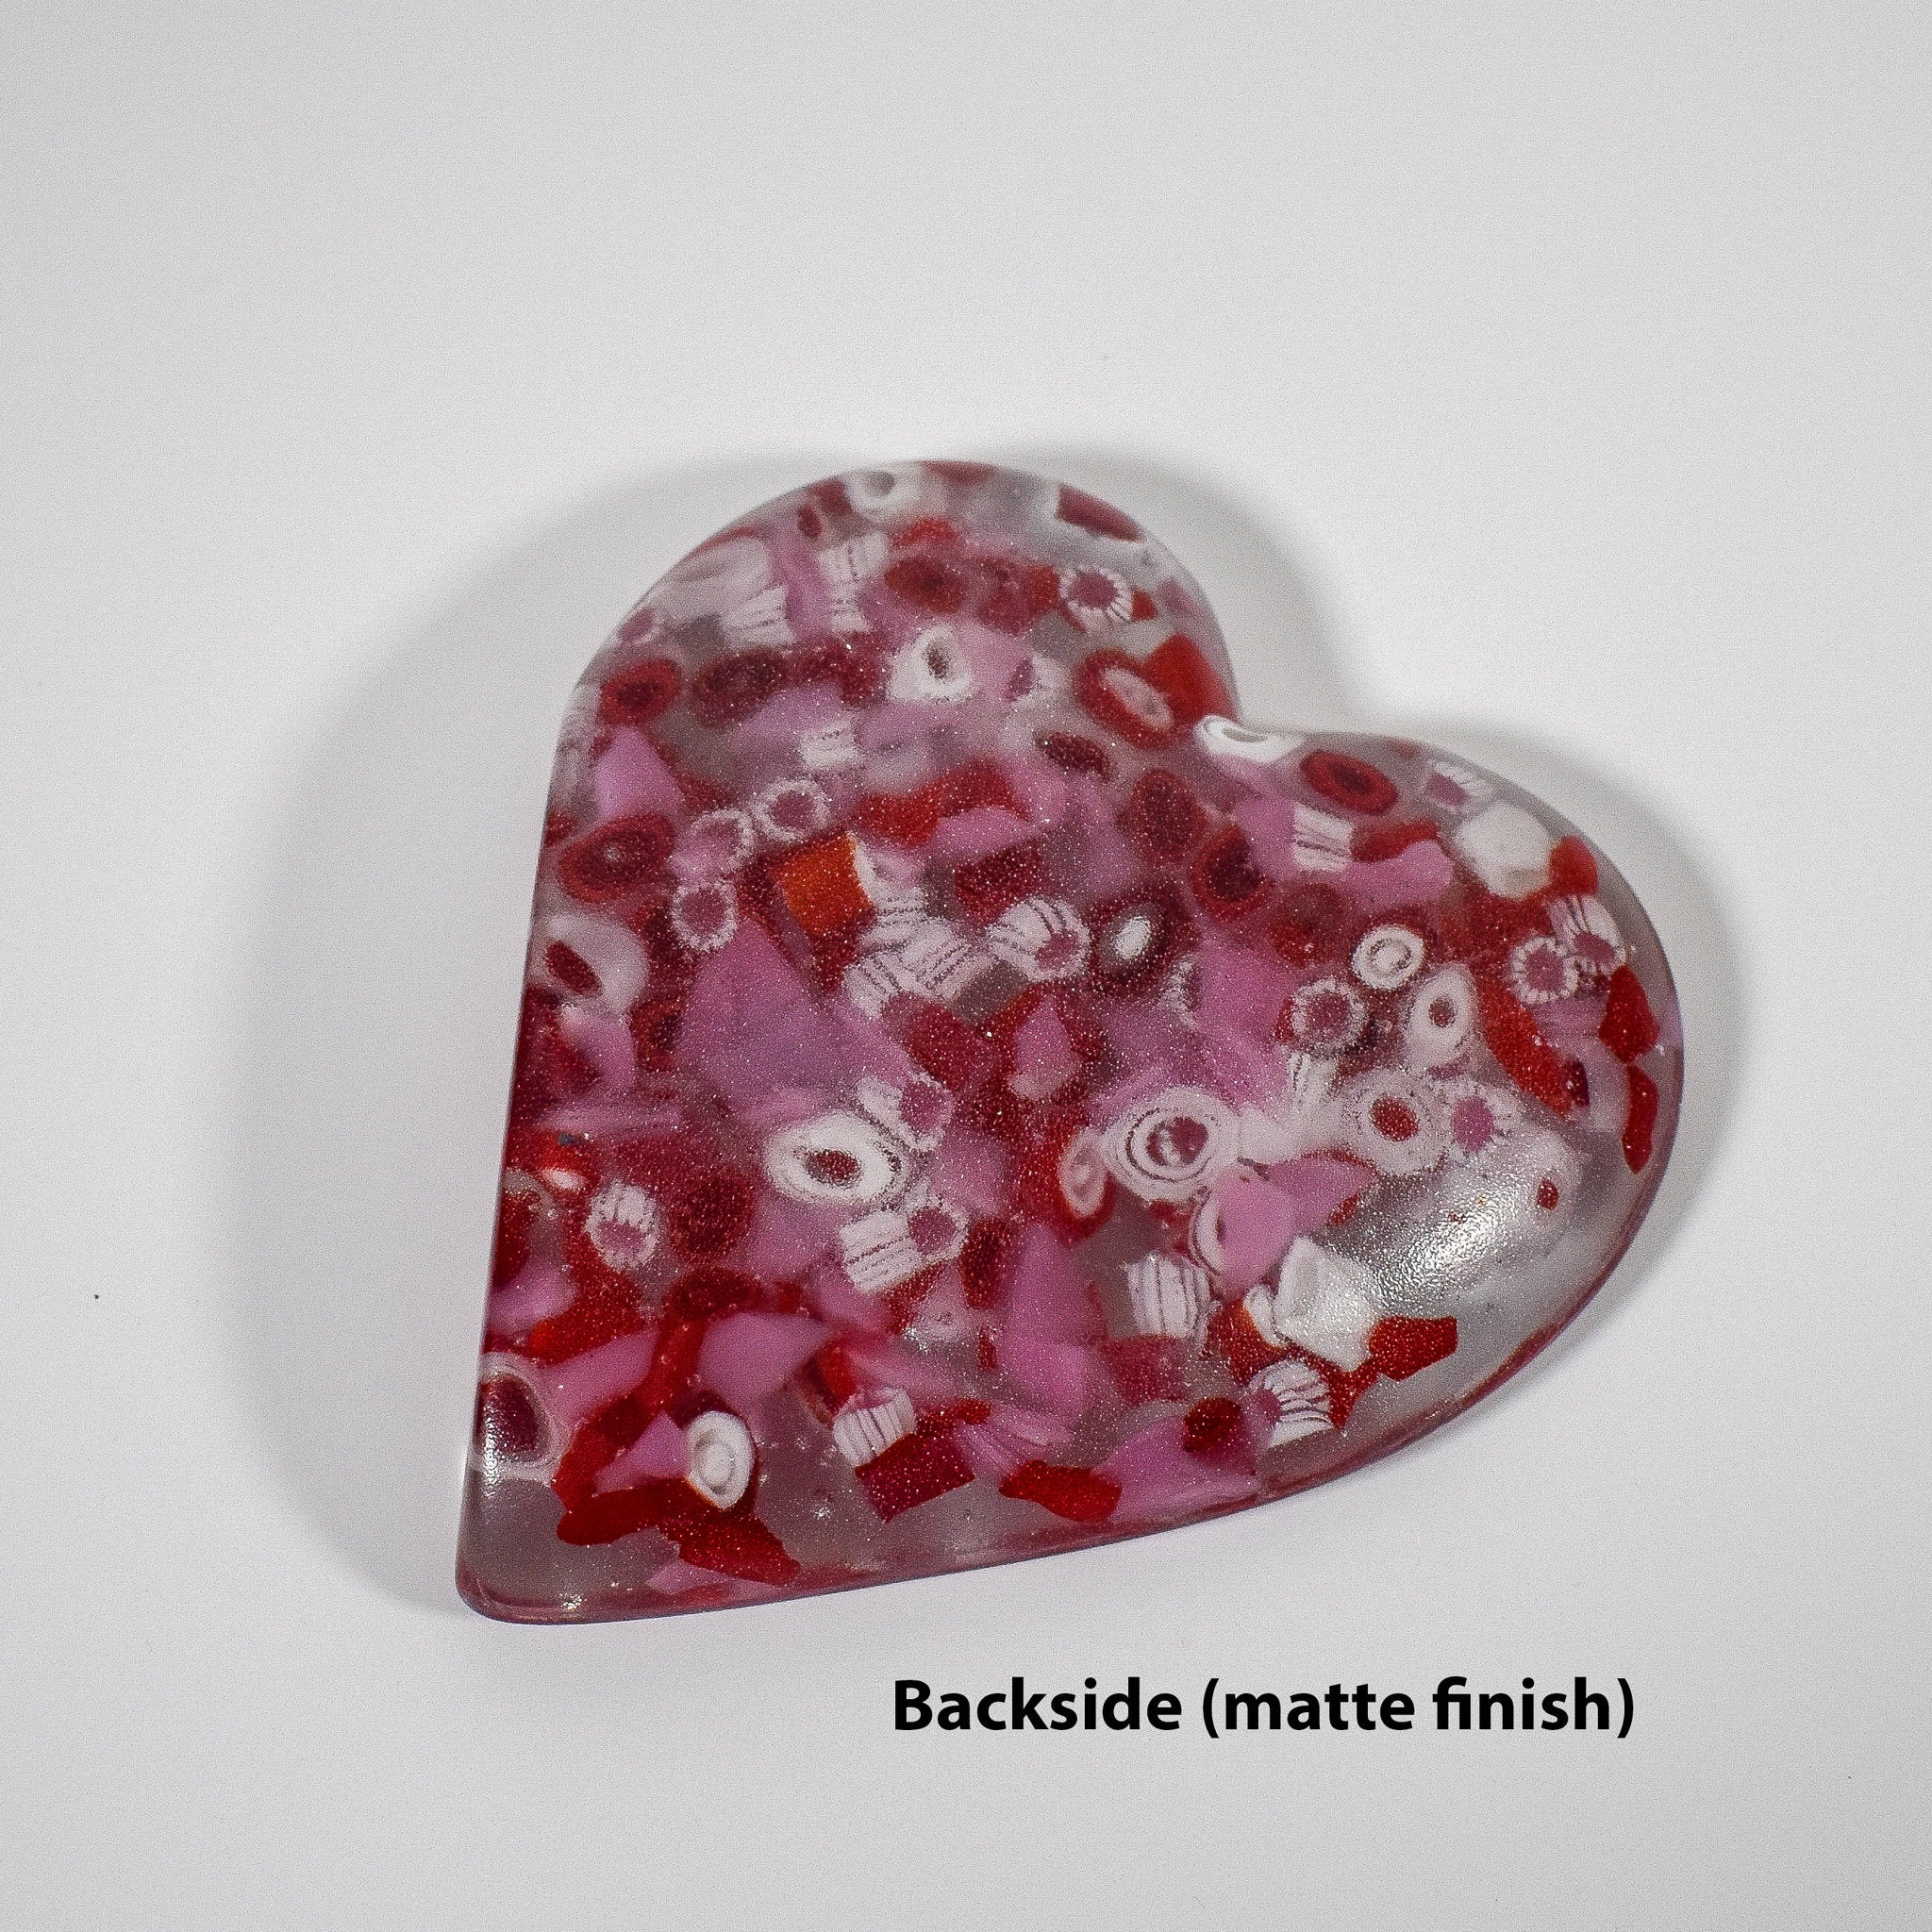 Pink and Red Fused Glass Standing Heart Paperweight - Office and Desk Decor for your Valentine